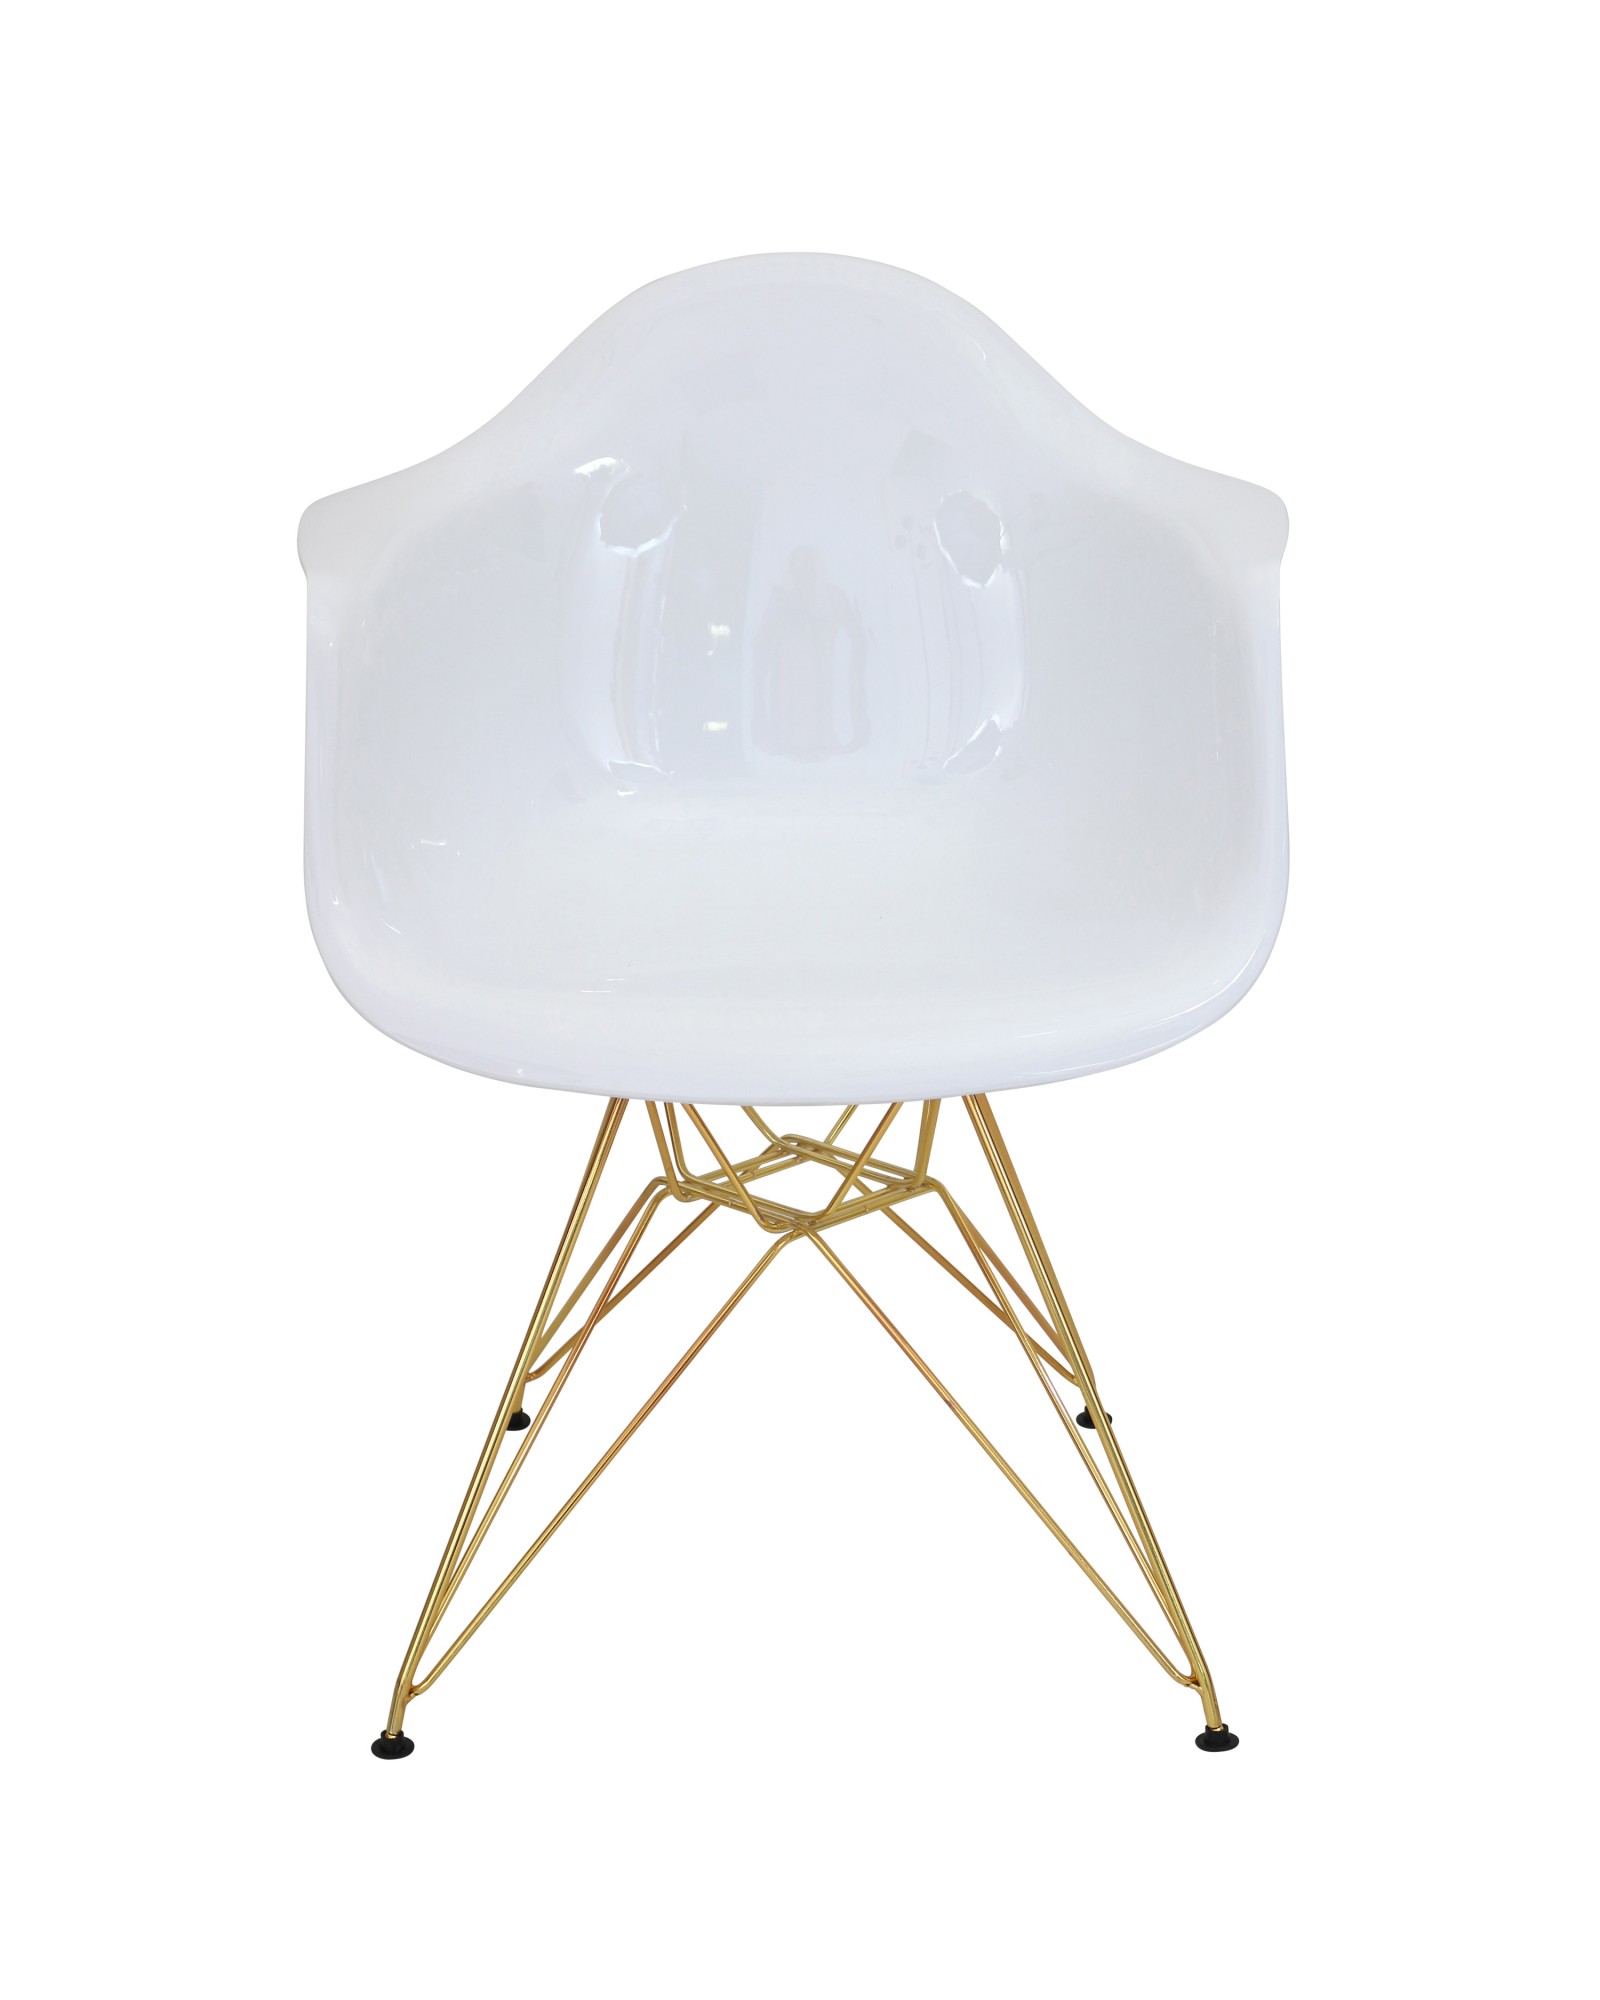 Neo Flair Mid-Century Modern Dining/Accent Chair in White and Gold